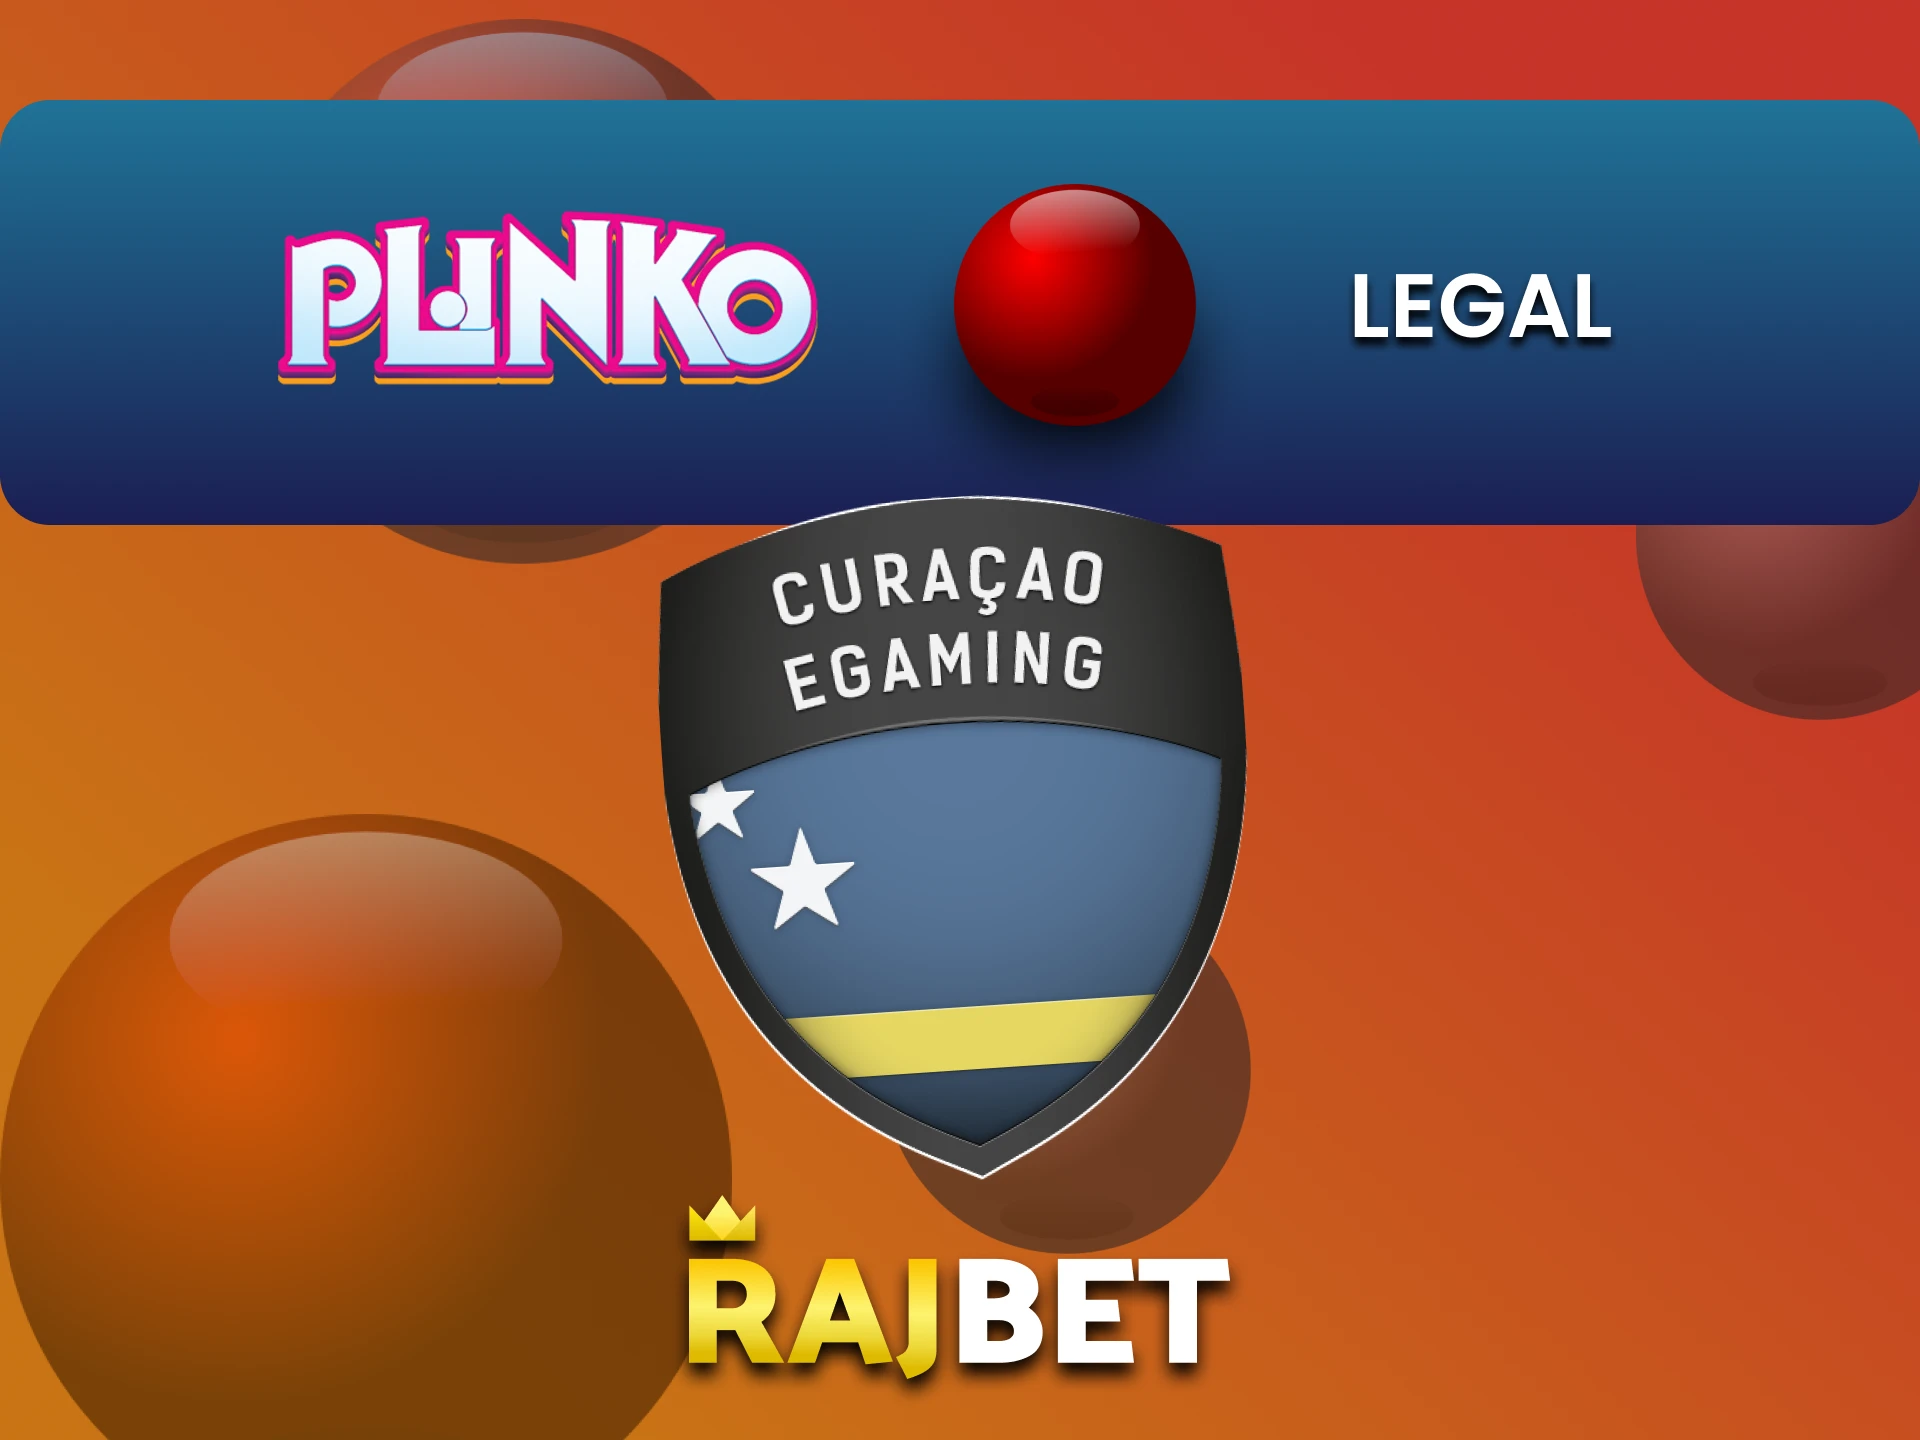 Rajbet is legal to play at Plinko.